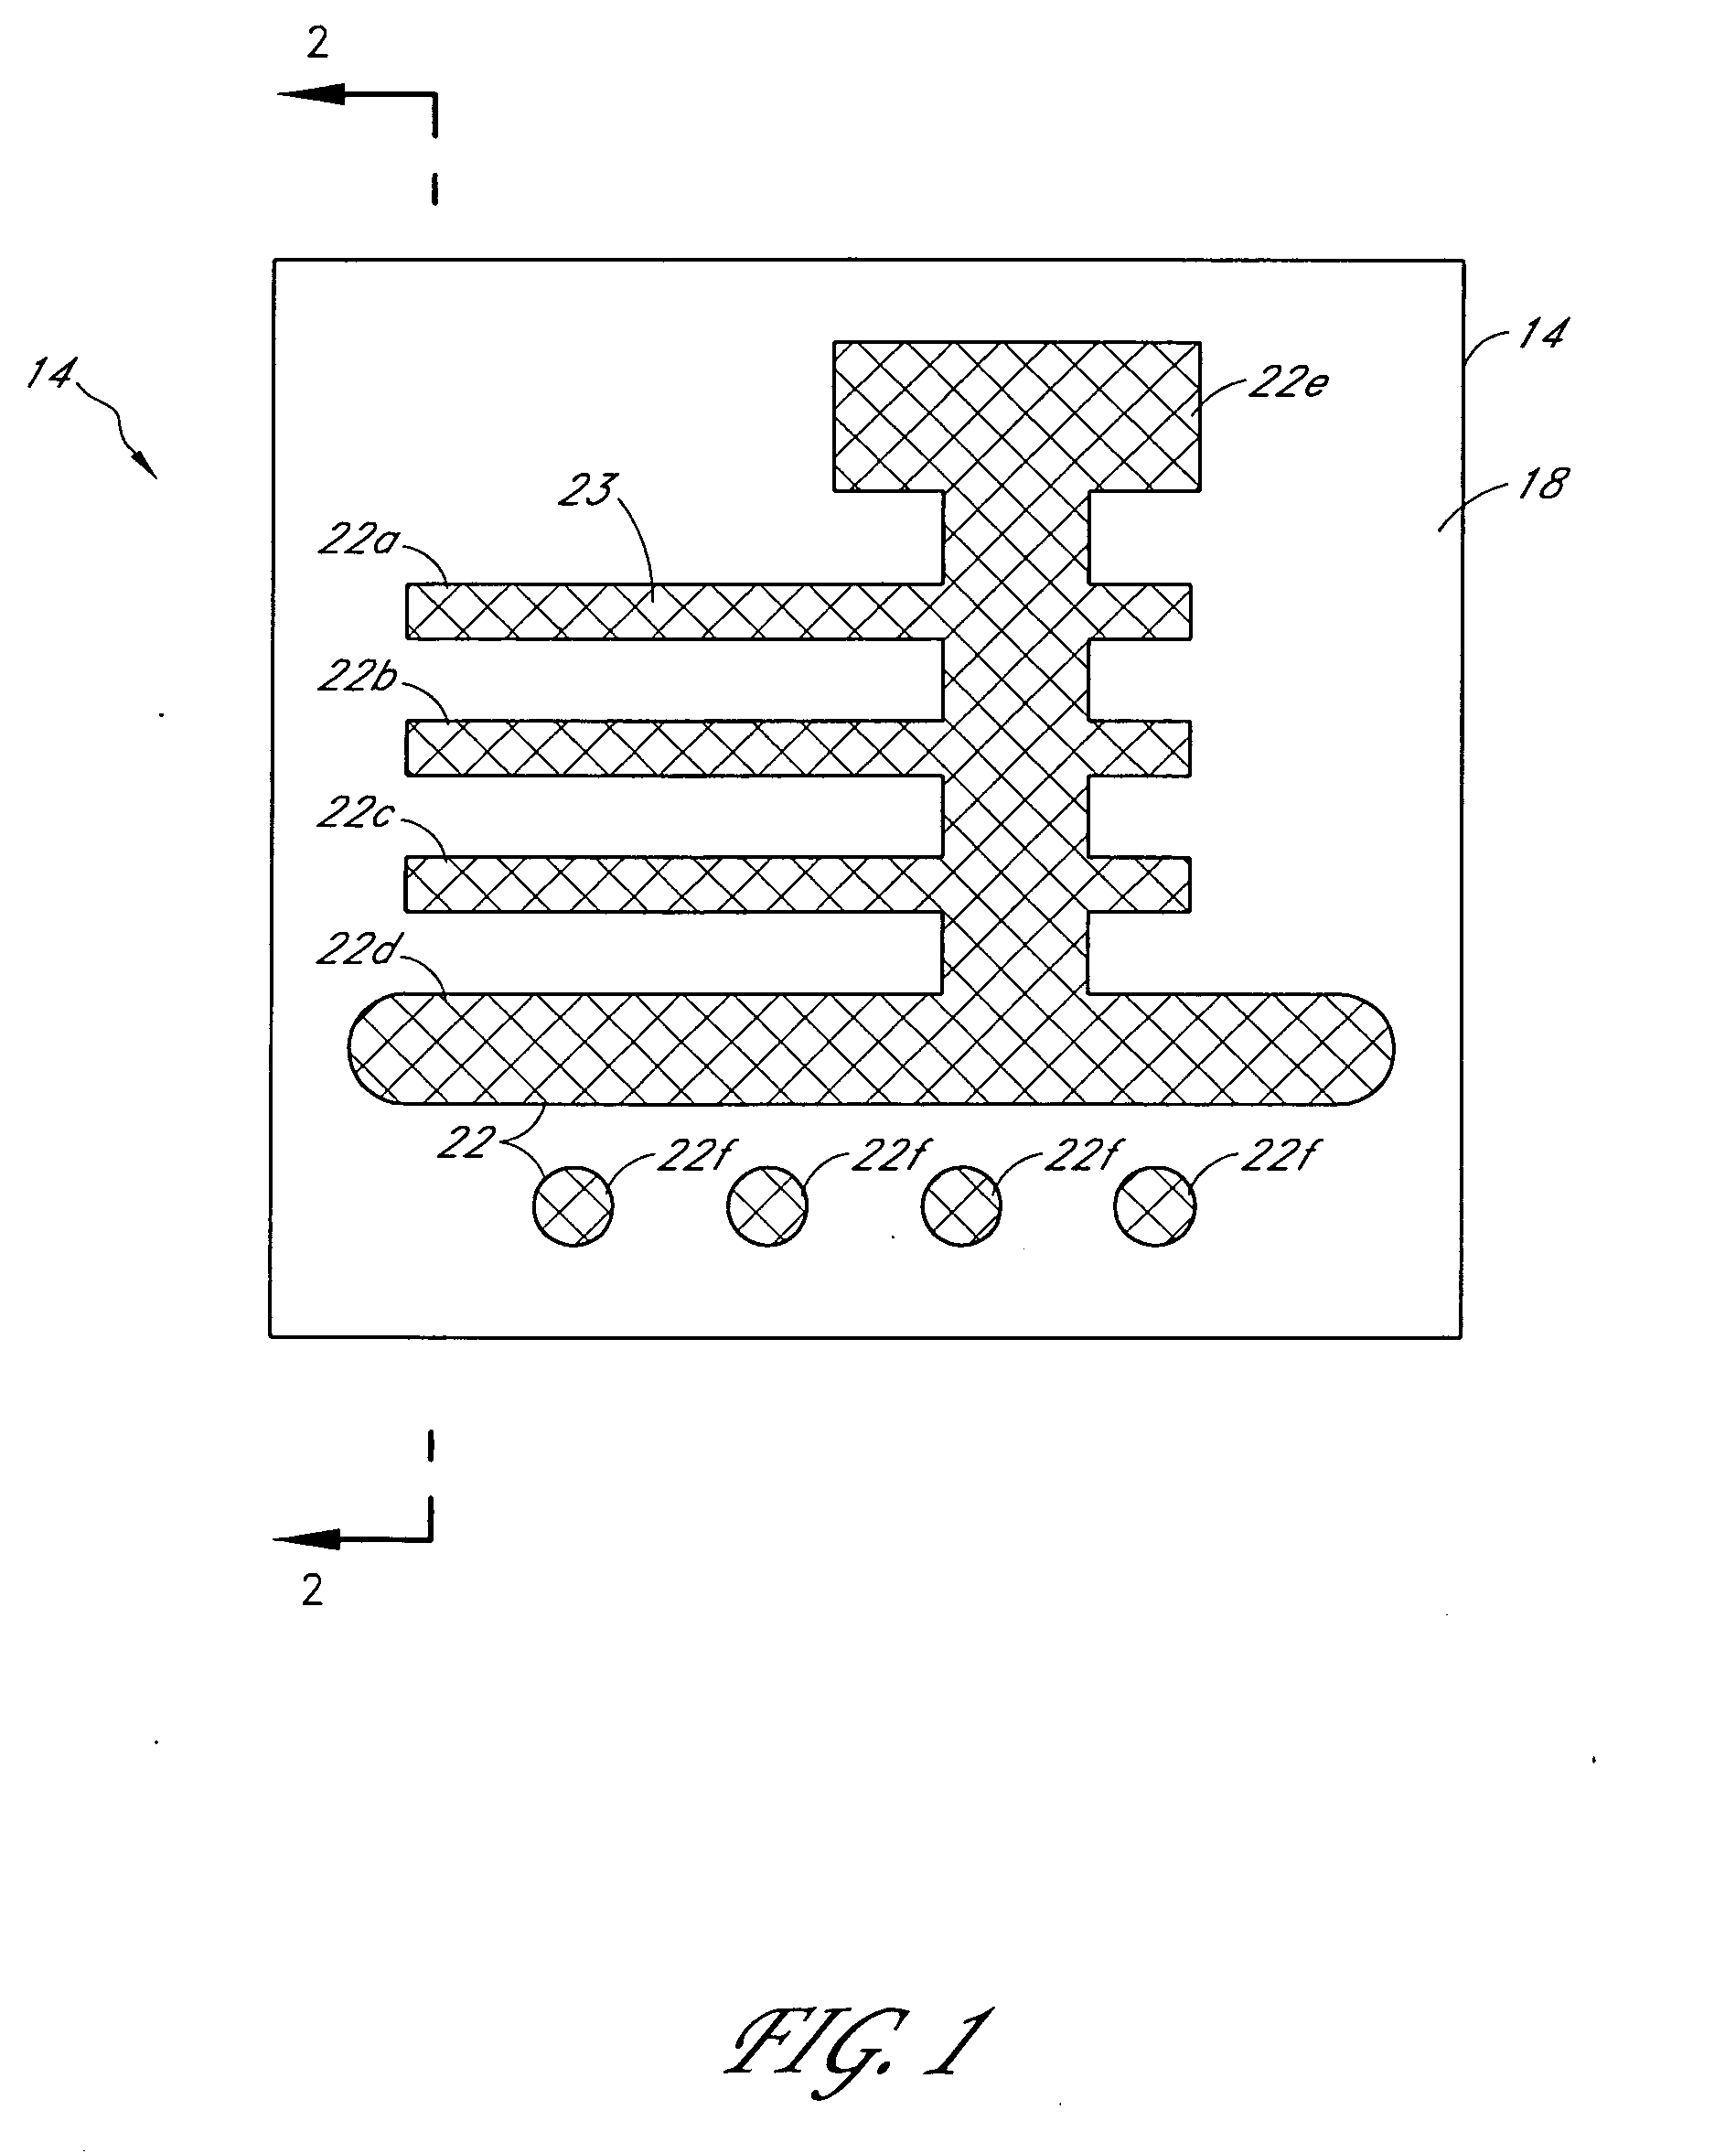 Photolithographic systems and methods for producing sub-diffraction-limited features